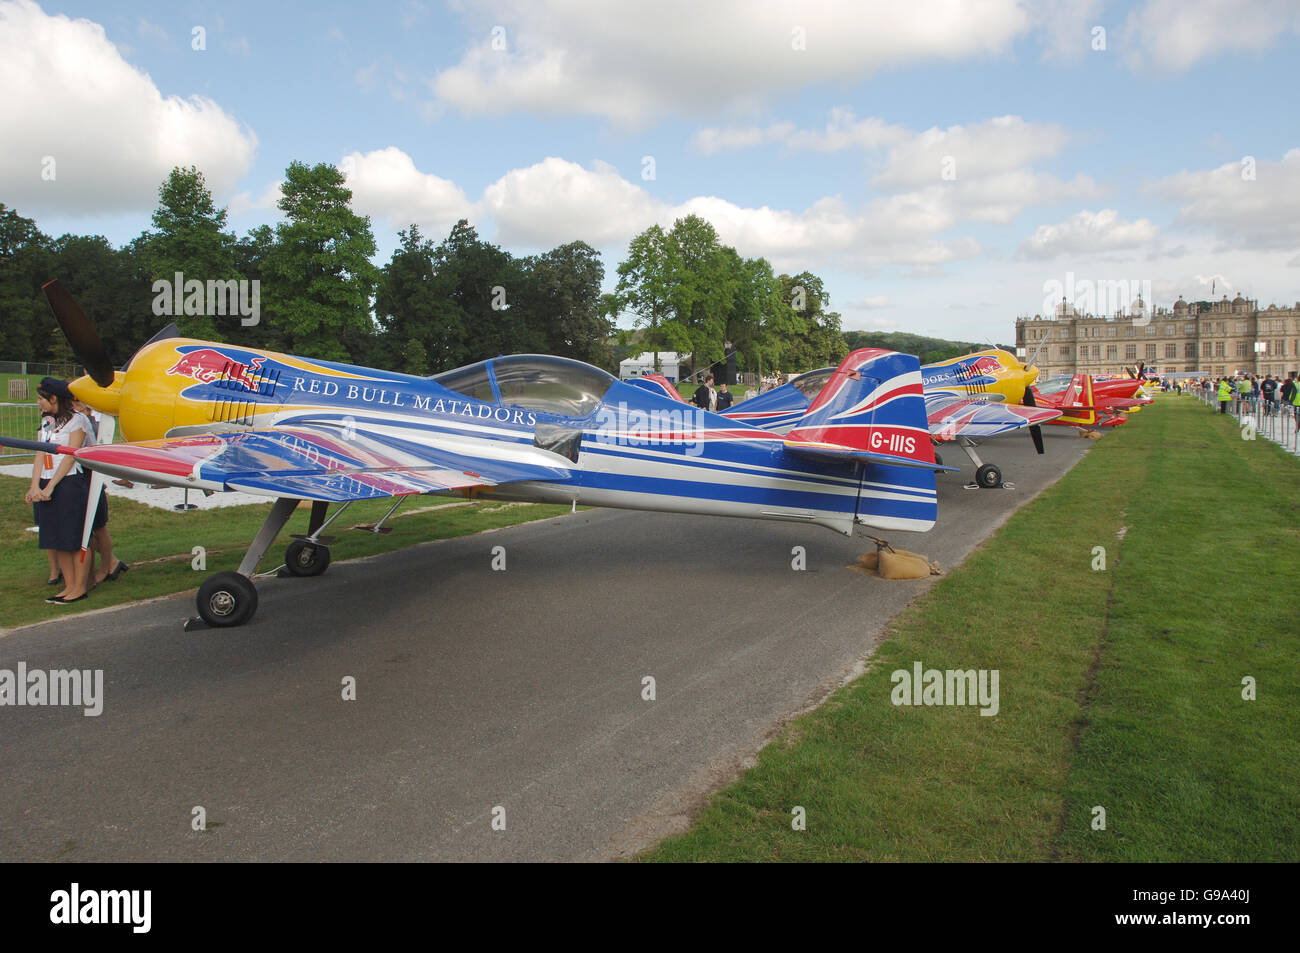 Red Bull Air Race World Series - Longleat House. Aircraft in the pitlane in front of Longleat House Stock Photo